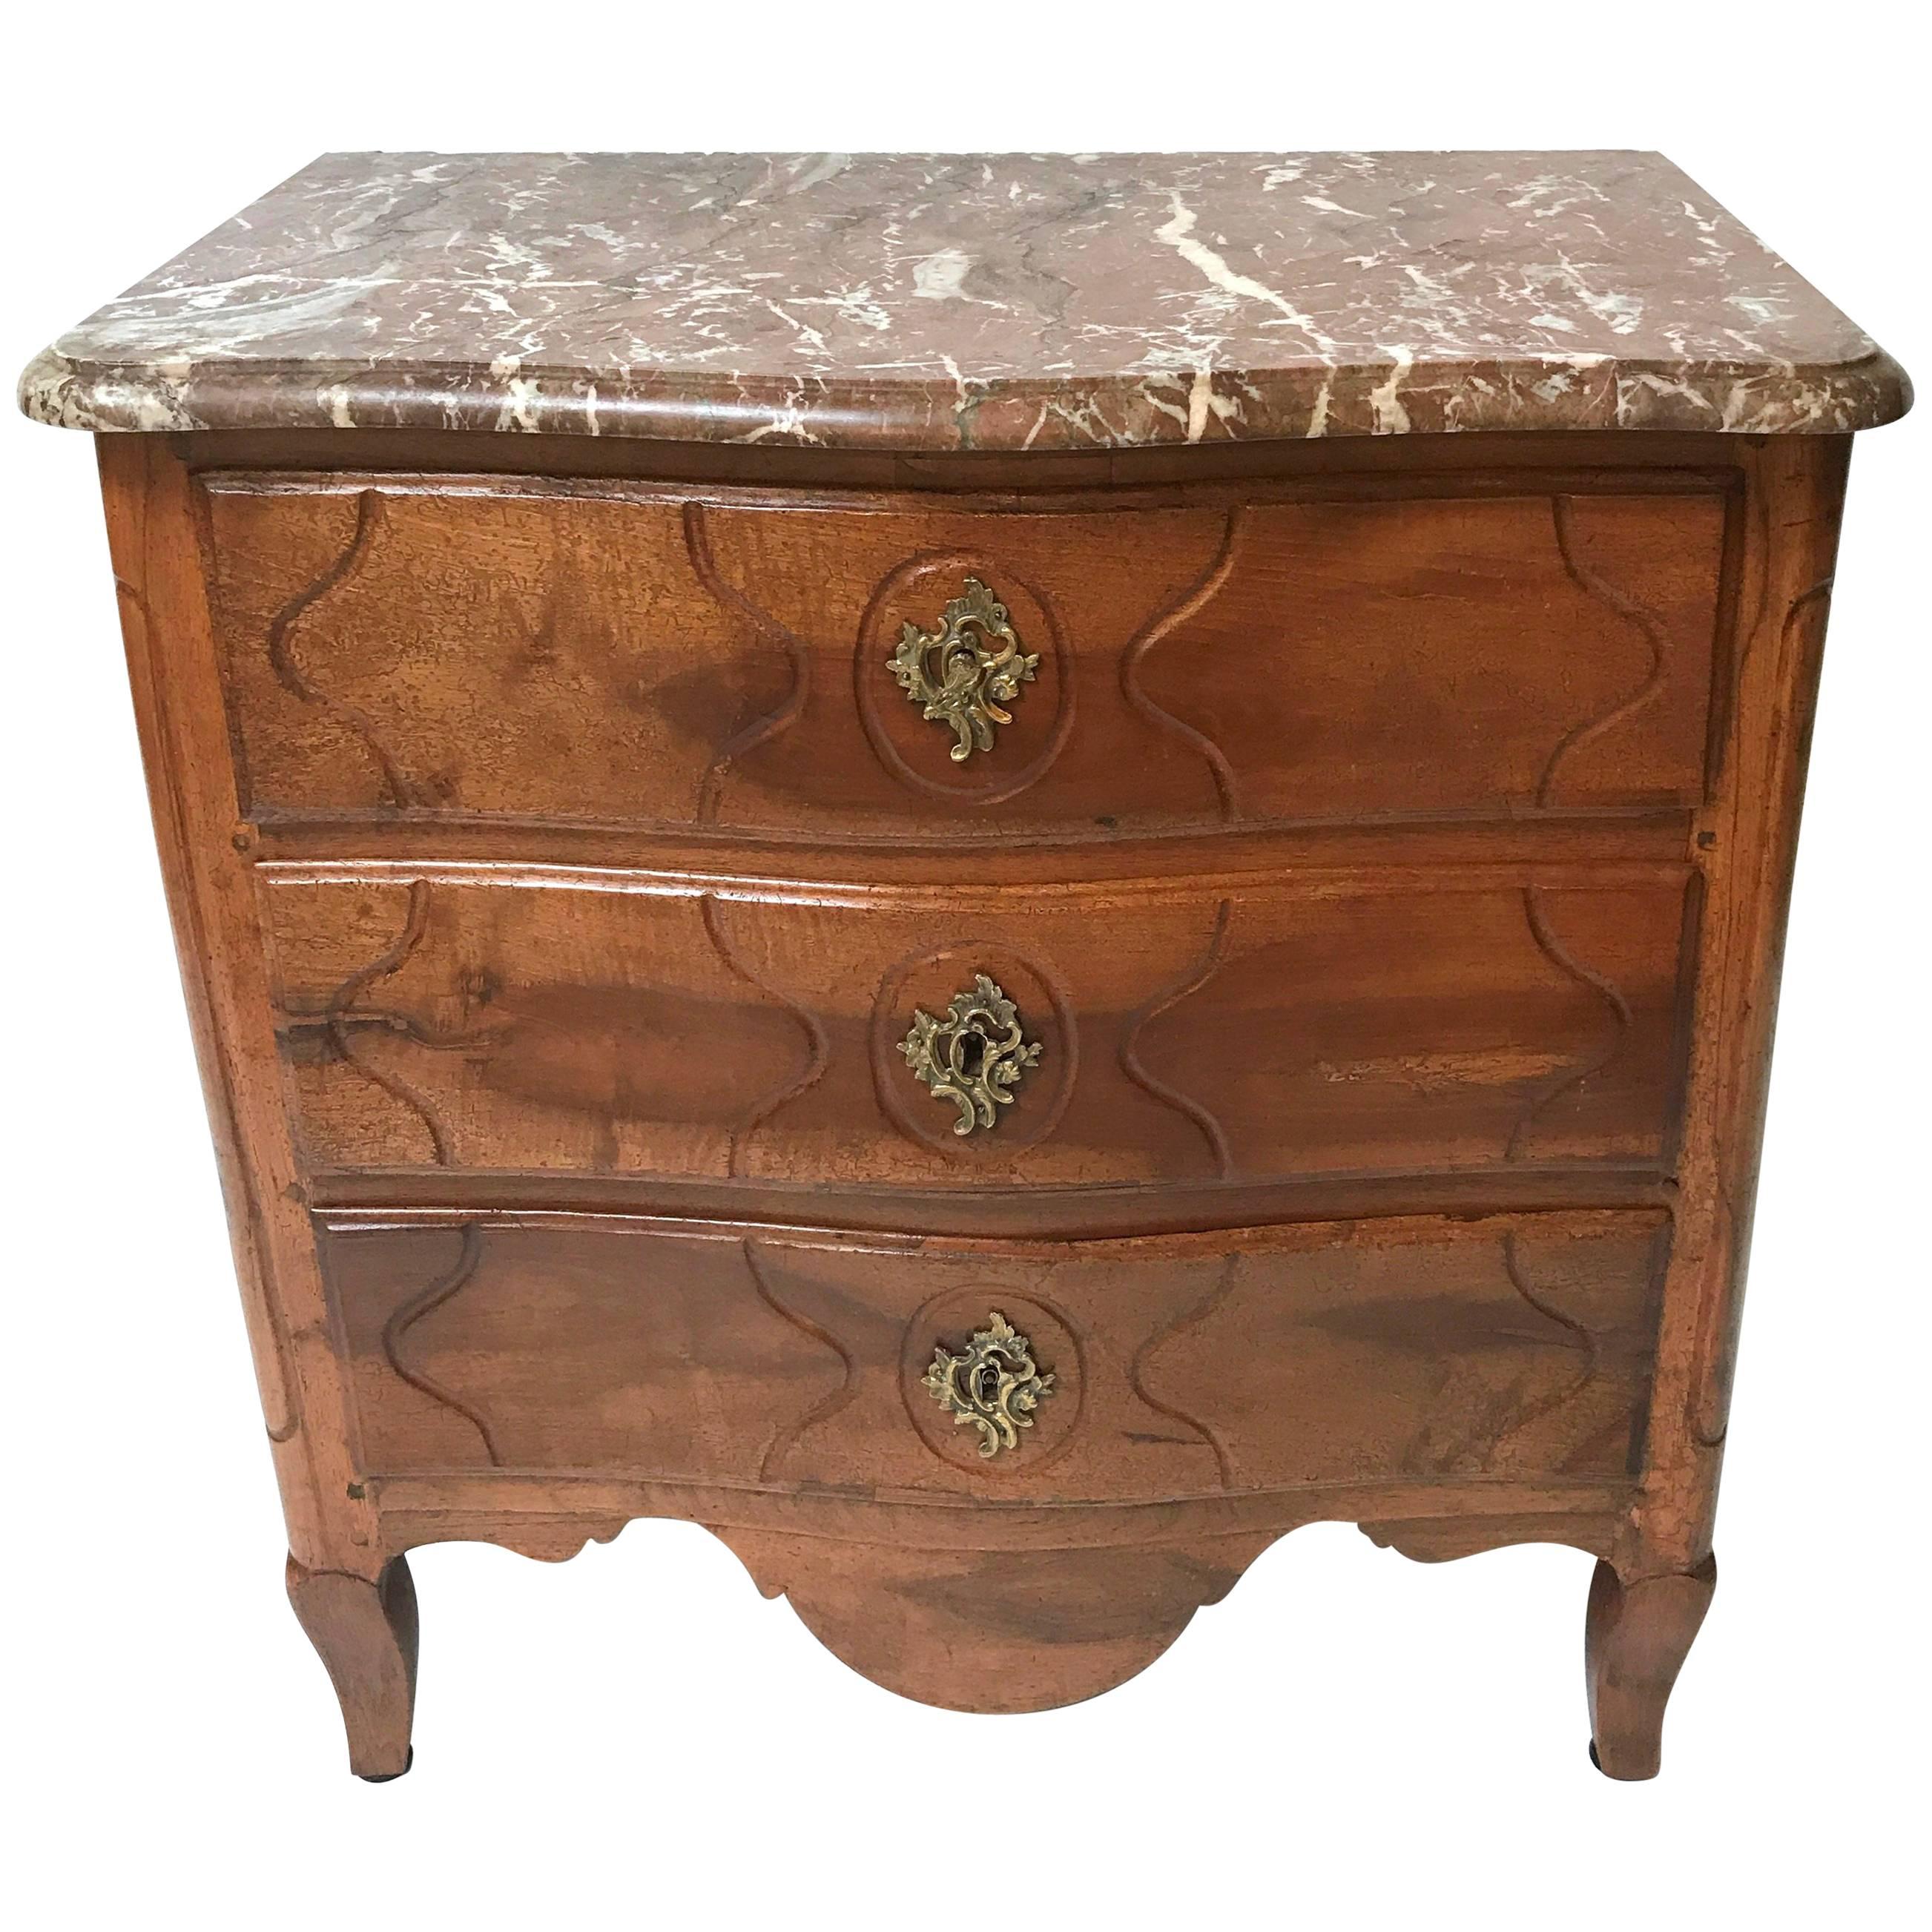 Period Louis XV French Petite Commode For Sale